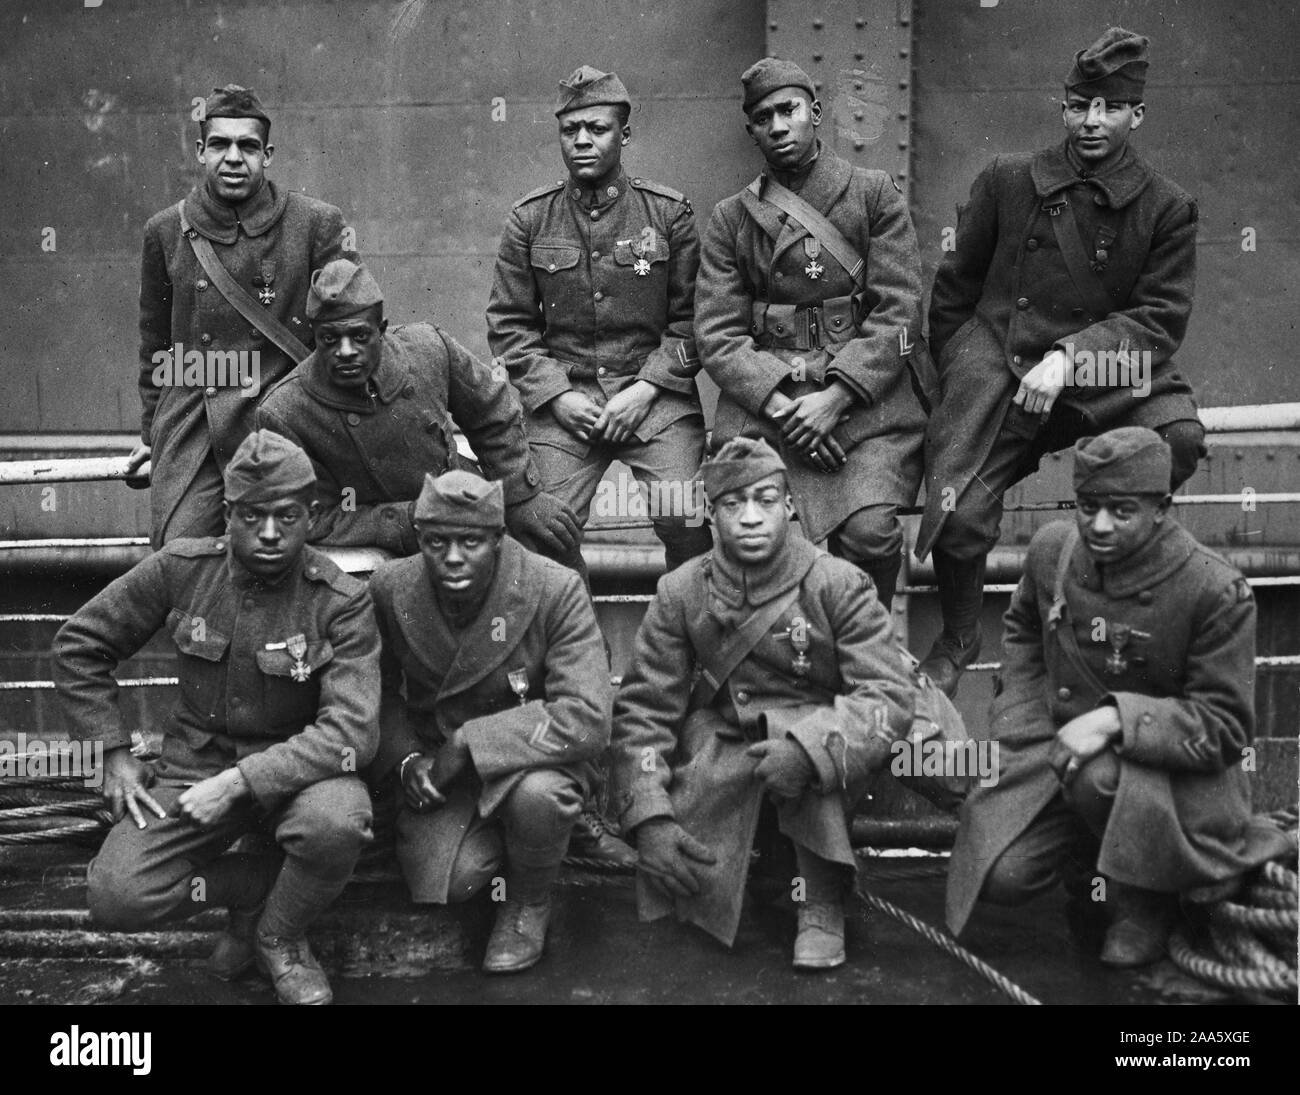 WW I Photos - Colored / African American Troops -New York's Colored Regiment Returns Home on Stockholm. Some of the colored men on 369th (15th N.Y.) who won the Croix de Guerre for gallantry in action. Front row, left to right: Private Eagle Eye, Ed Williams; Lamp Light, Herbert Tayl ca. 2/12/1919 Stock Photo